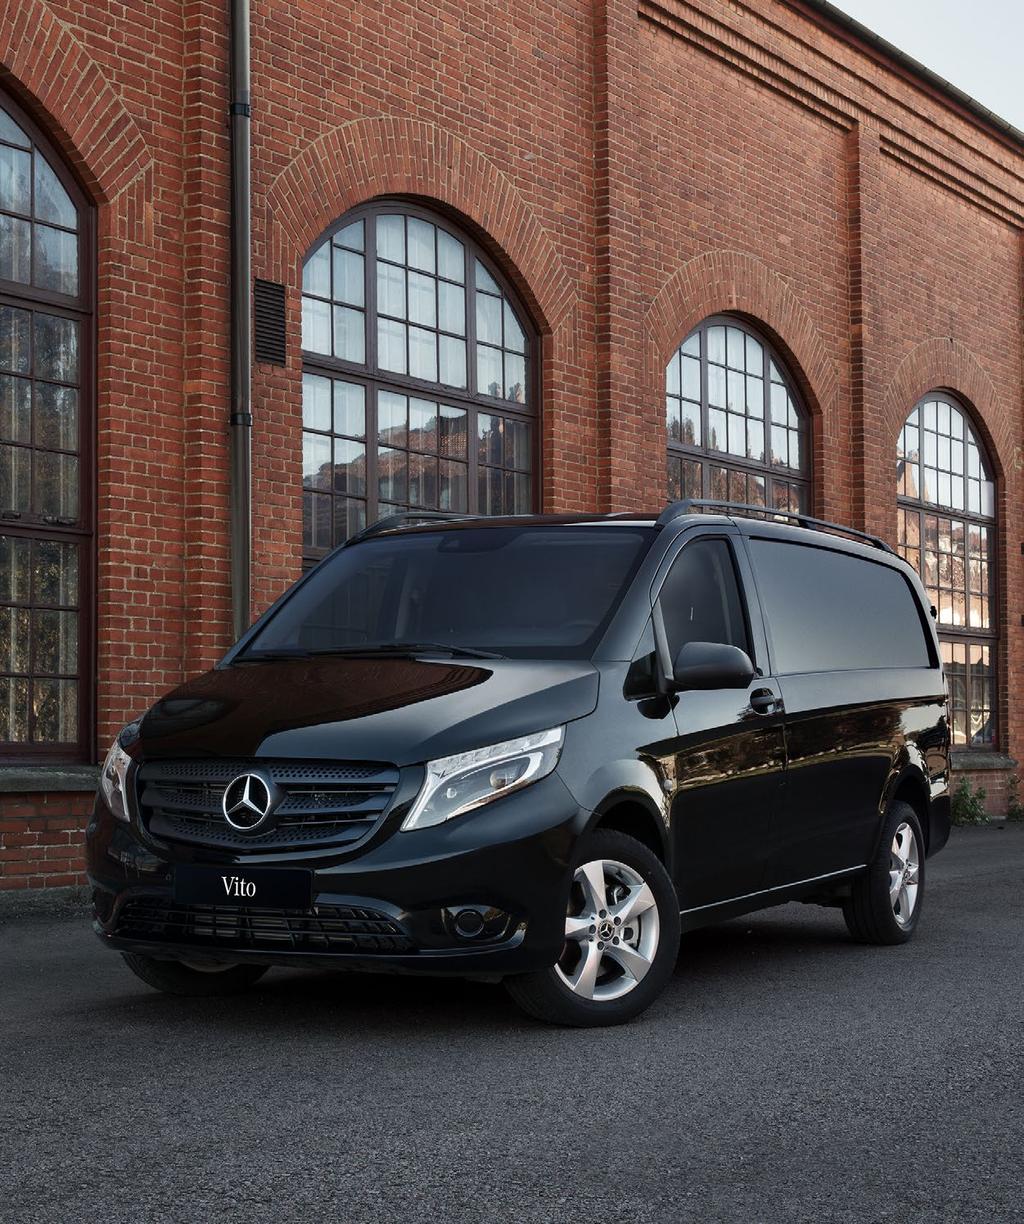 Contents 3 4 5 your Vito 6 and payload 7 8 Colours and trim 12 13 & gearbox 14 15 19 Dimensions 22 List prices 24 Optional 30 34 36 Please note This document provides information about the model